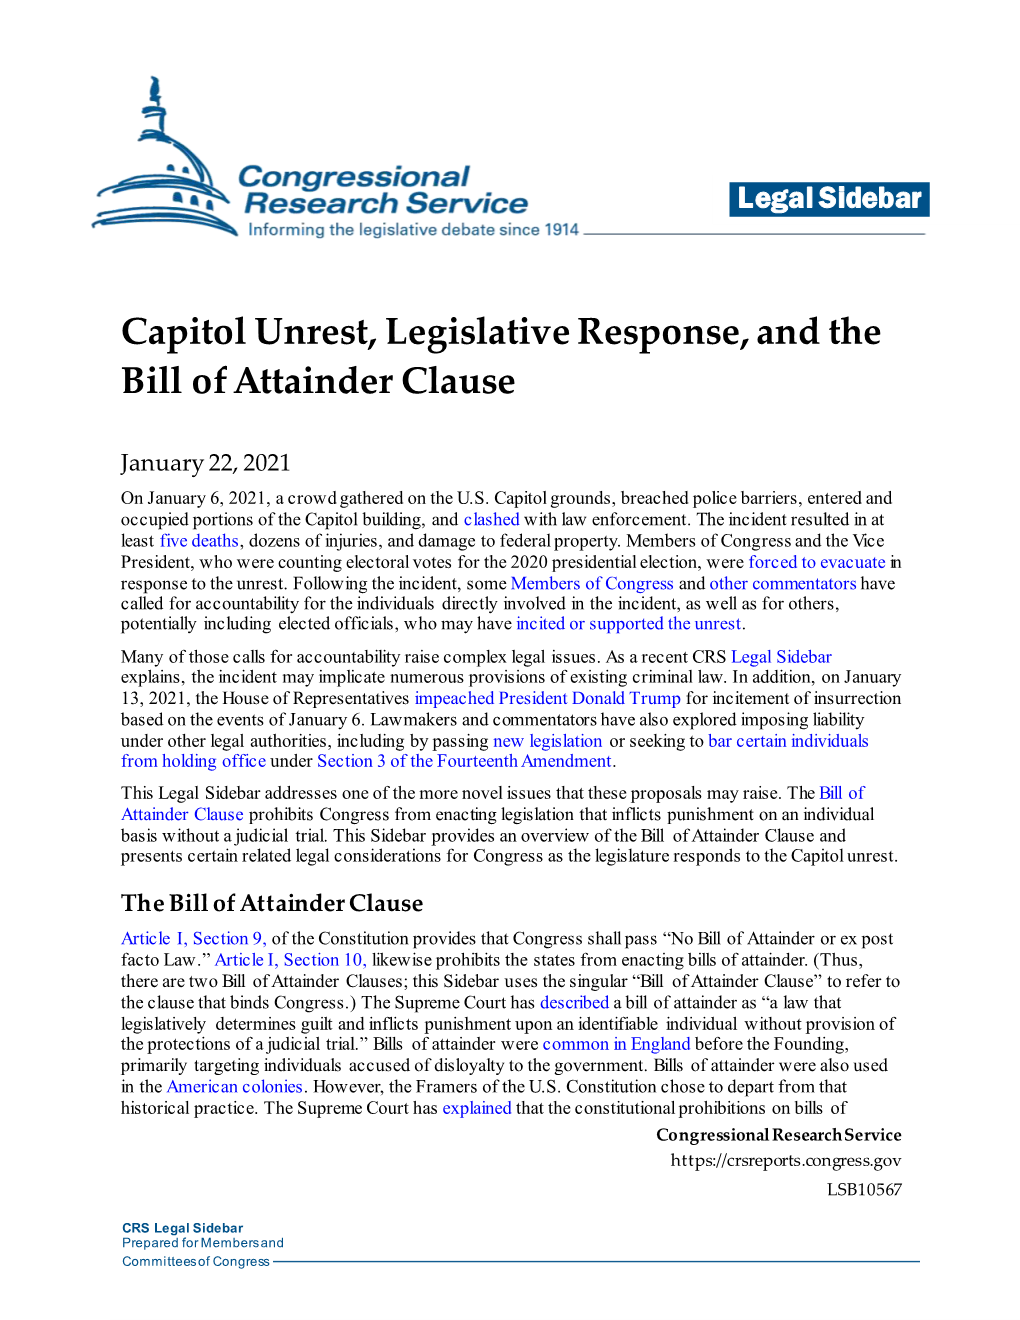 Capitol Unrest, Legislative Response, and the Bill of Attainder Clause